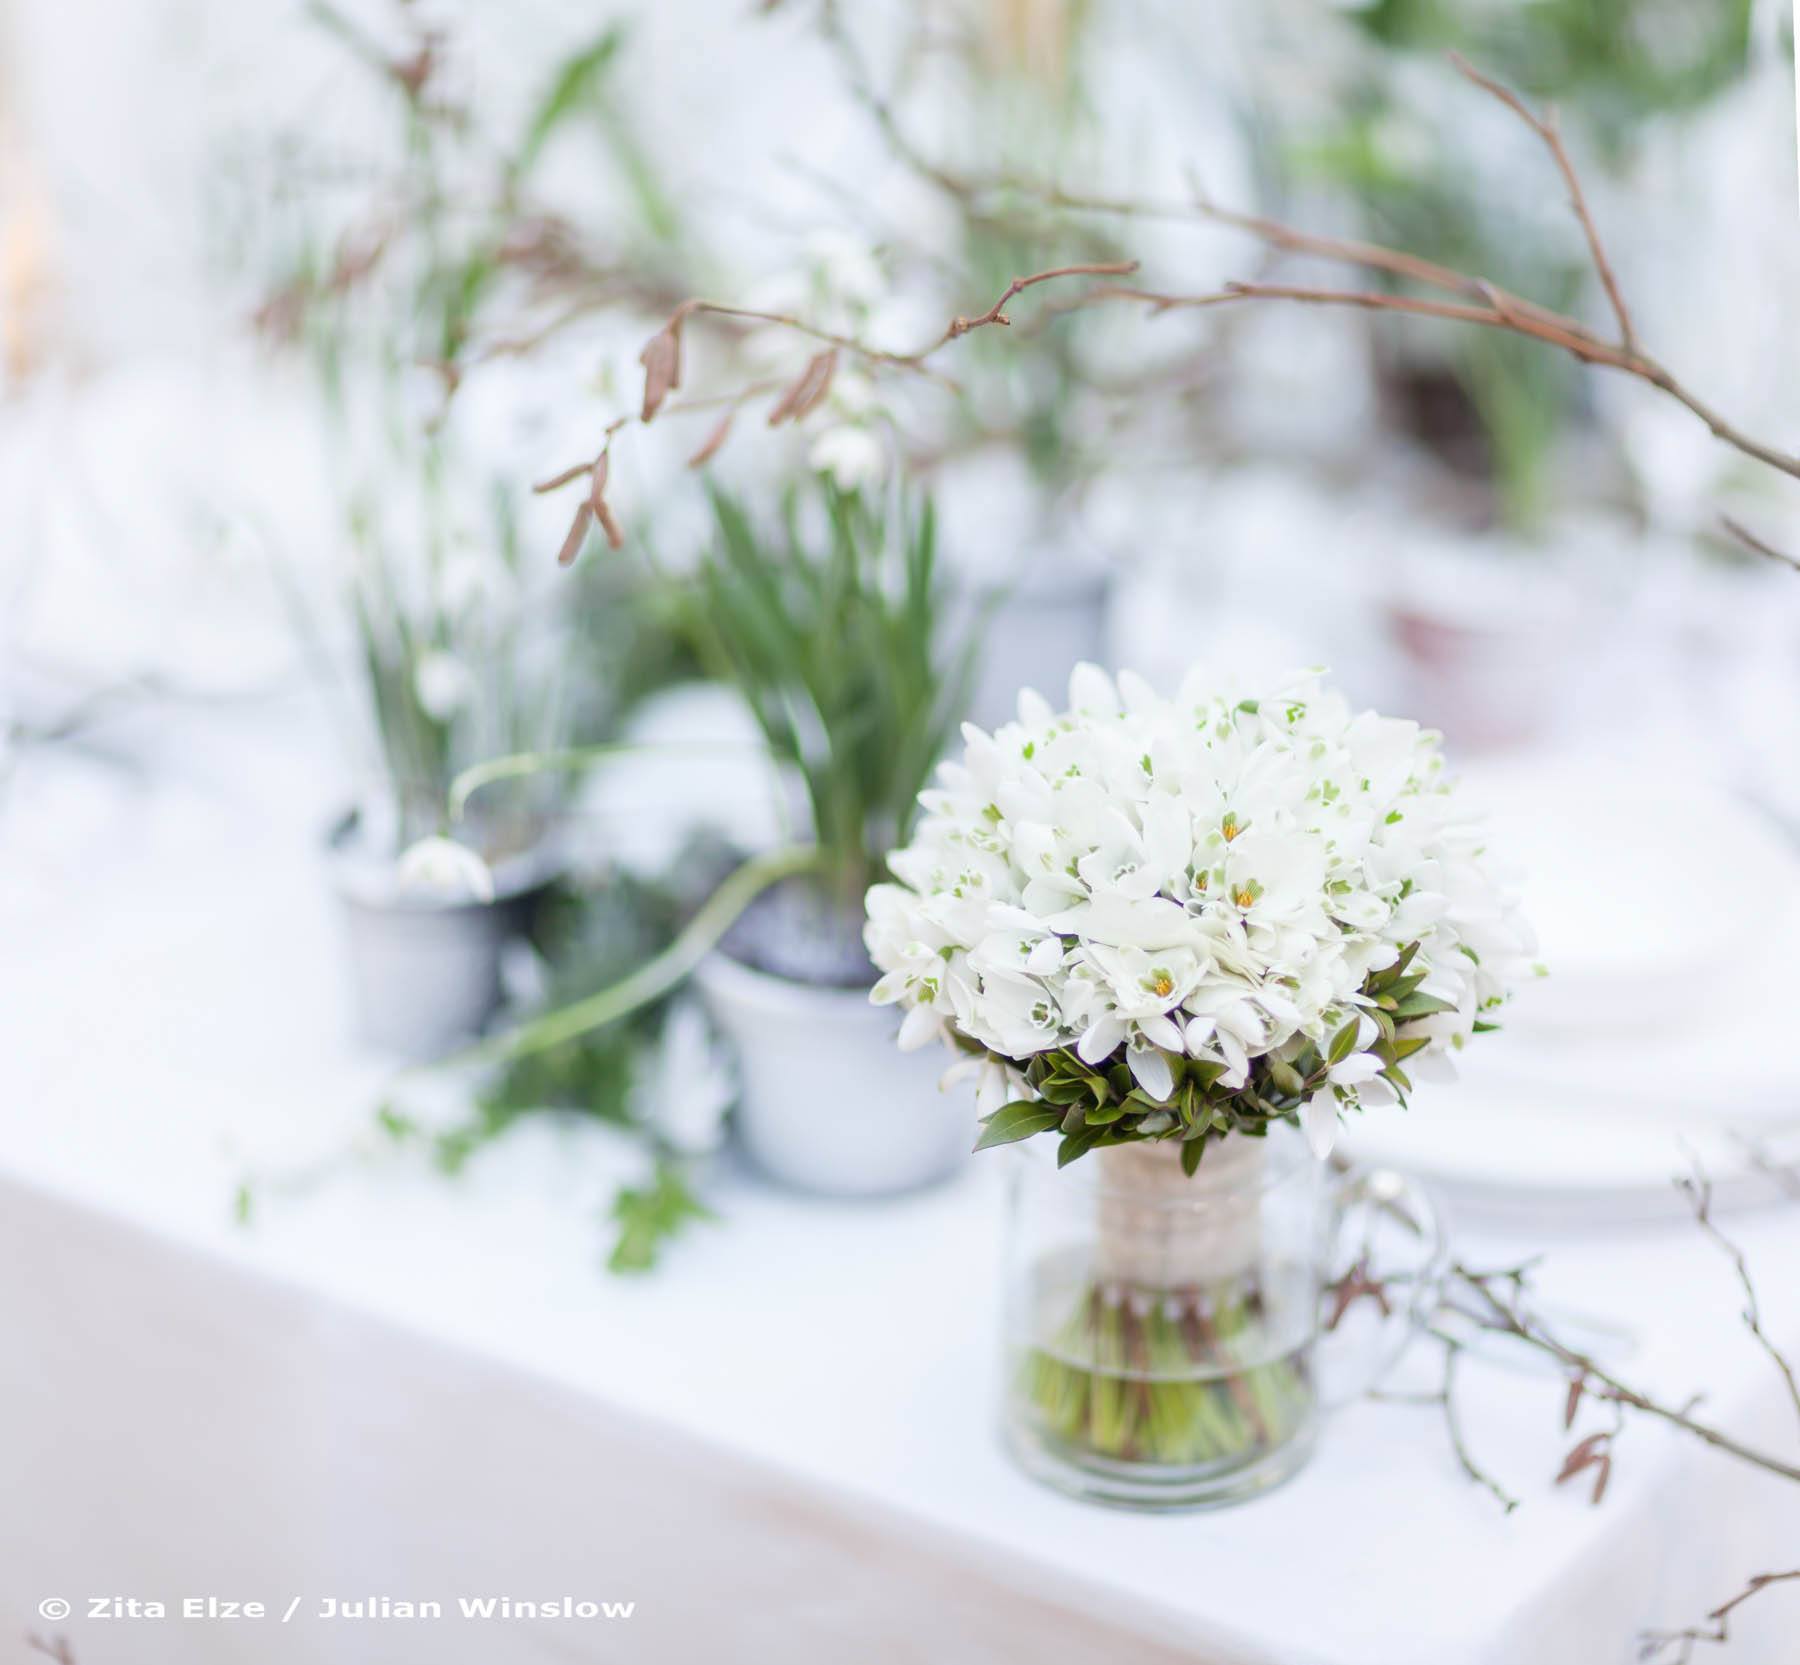 zoom in of a small white flower bouquet on a table with other small plant plots